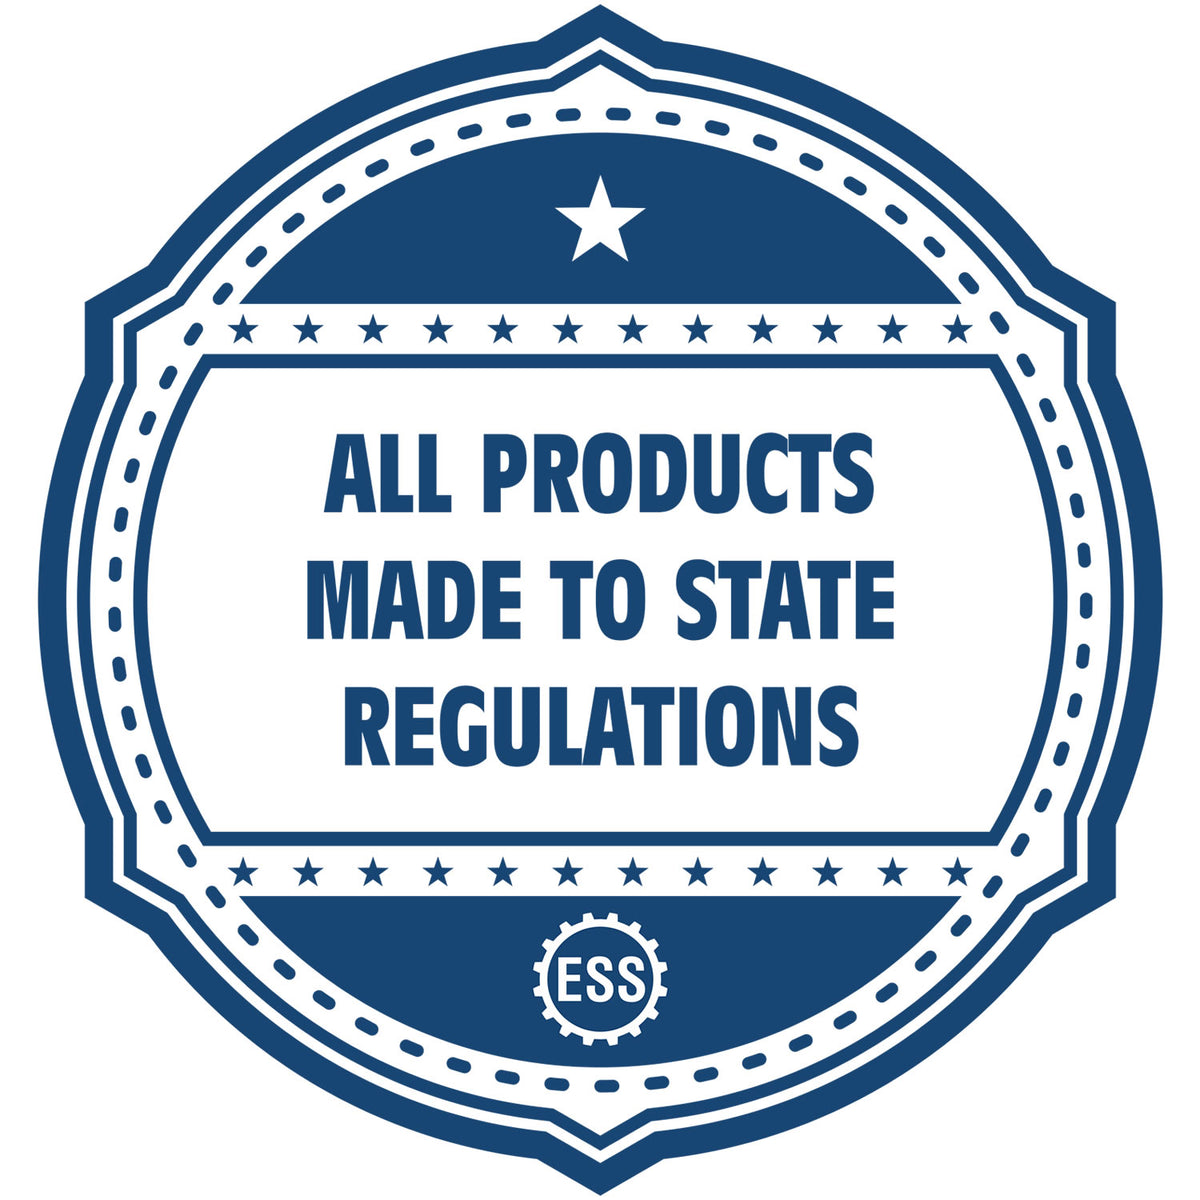 An icon or badge element for the Super Slim Rhode Island Notary Public Stamp showing that this product is made in compliance with state regulations.